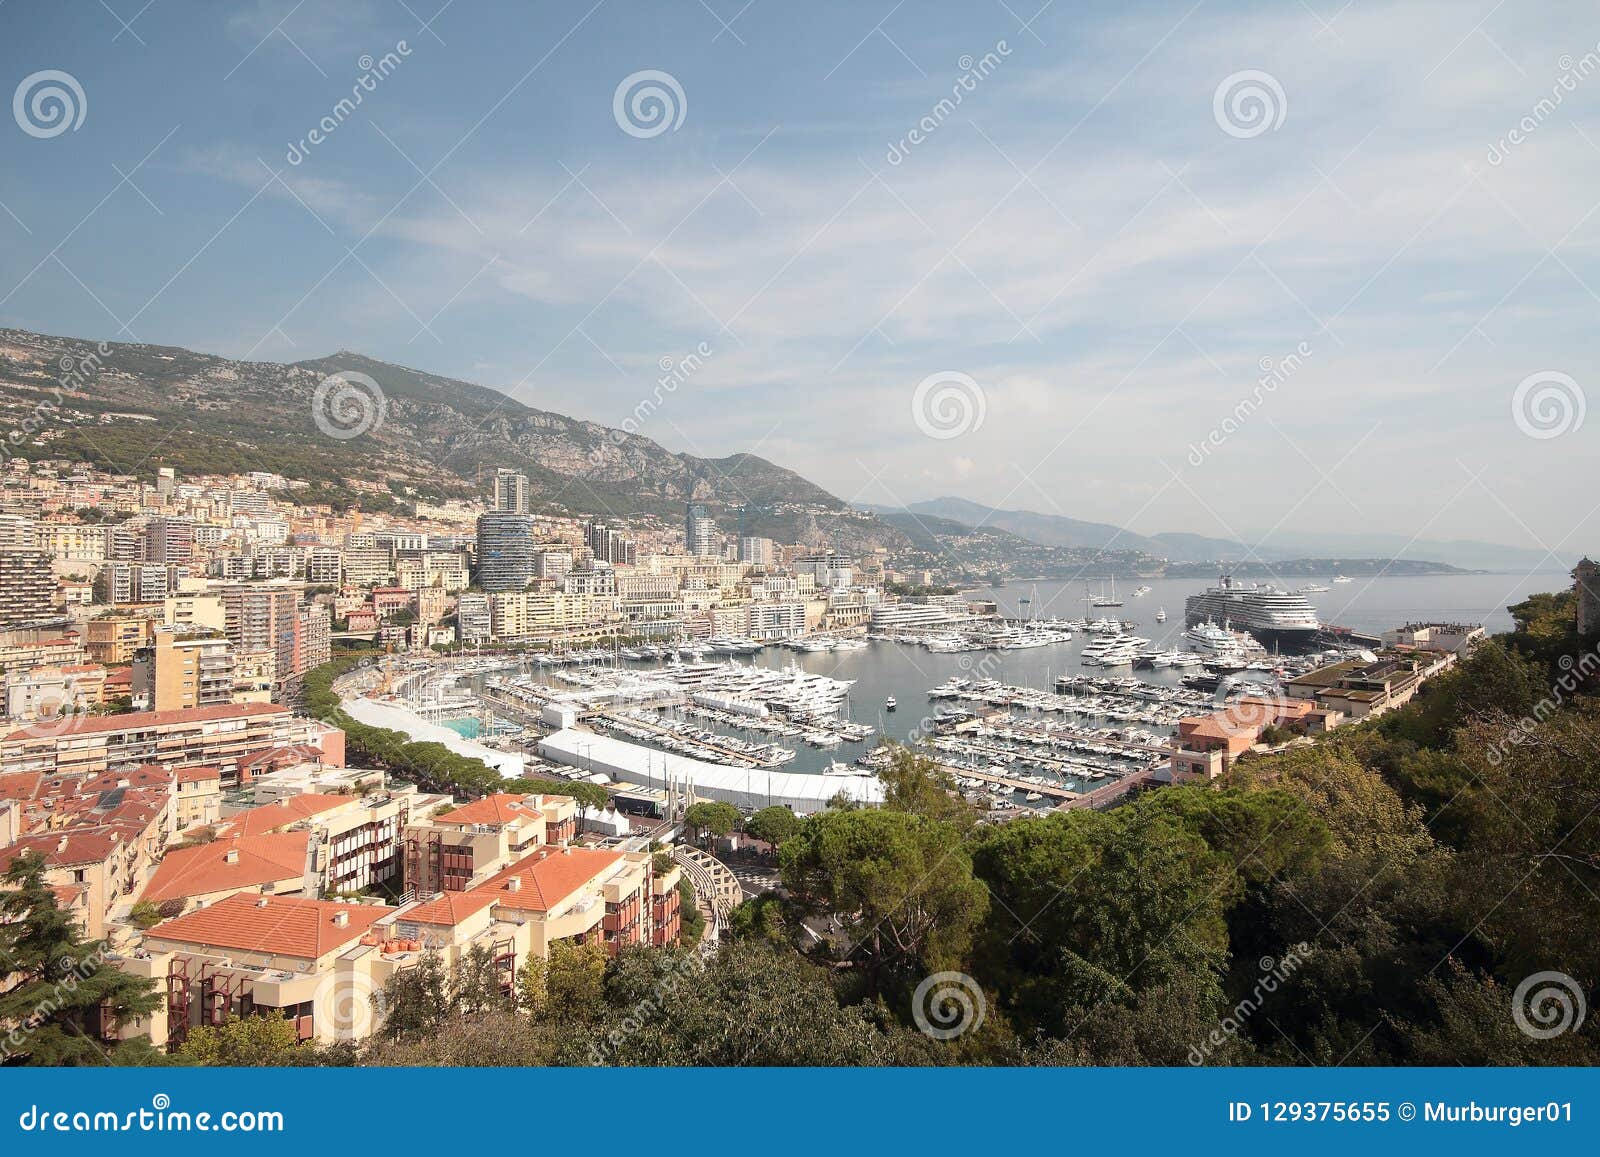 monaco a rich tax haven in the mediterranean nestled on the french coast